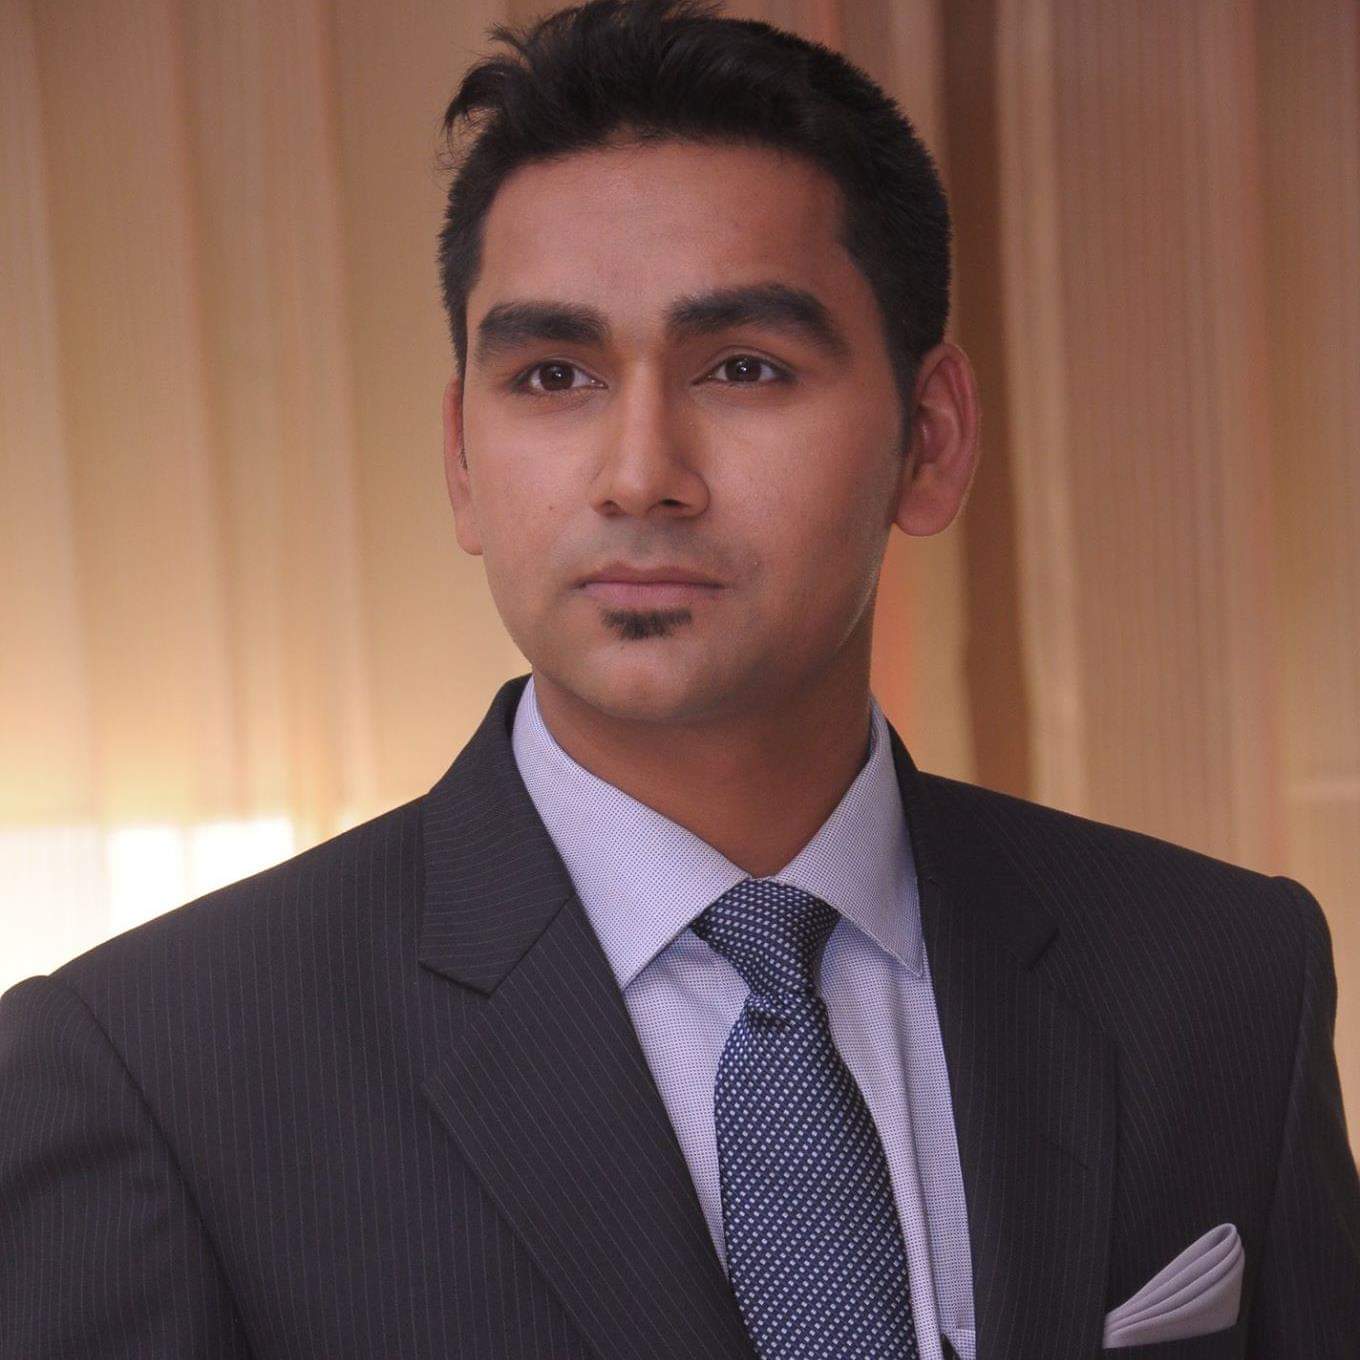 securing-multiple-career-leaps-with-the-sp-jain-executive-mba-himanshu-singh-s-story